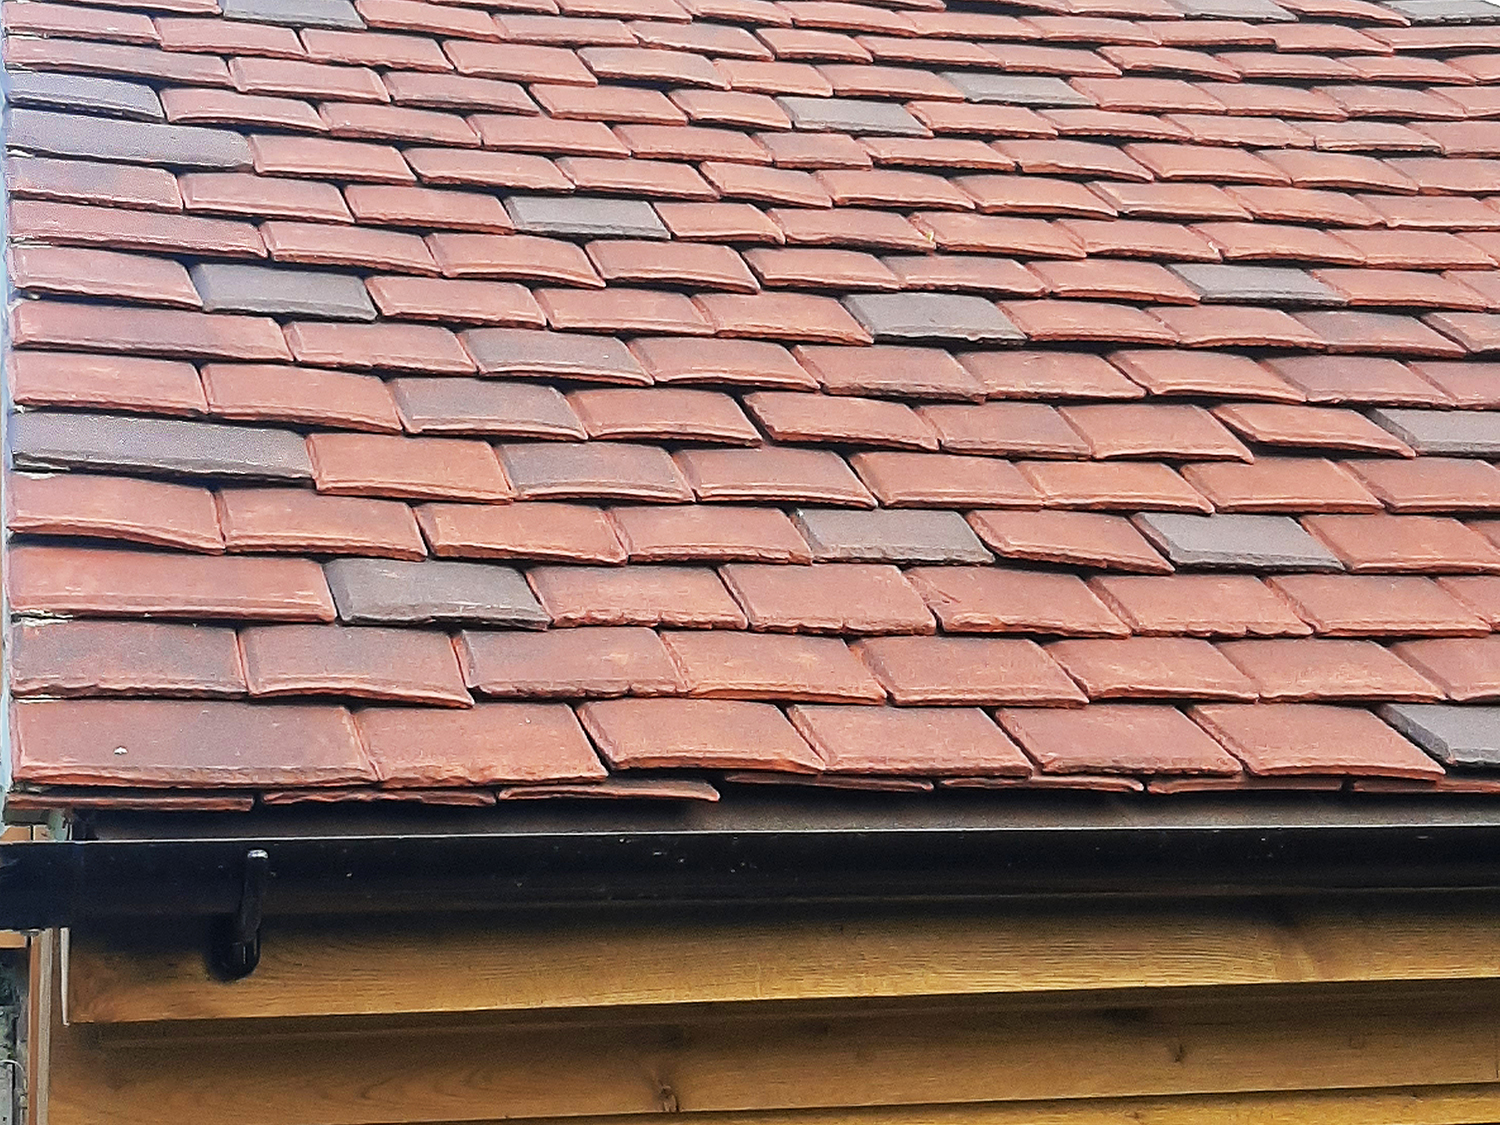 Tudor Roof Tiles launches a new range of old English peg tiles